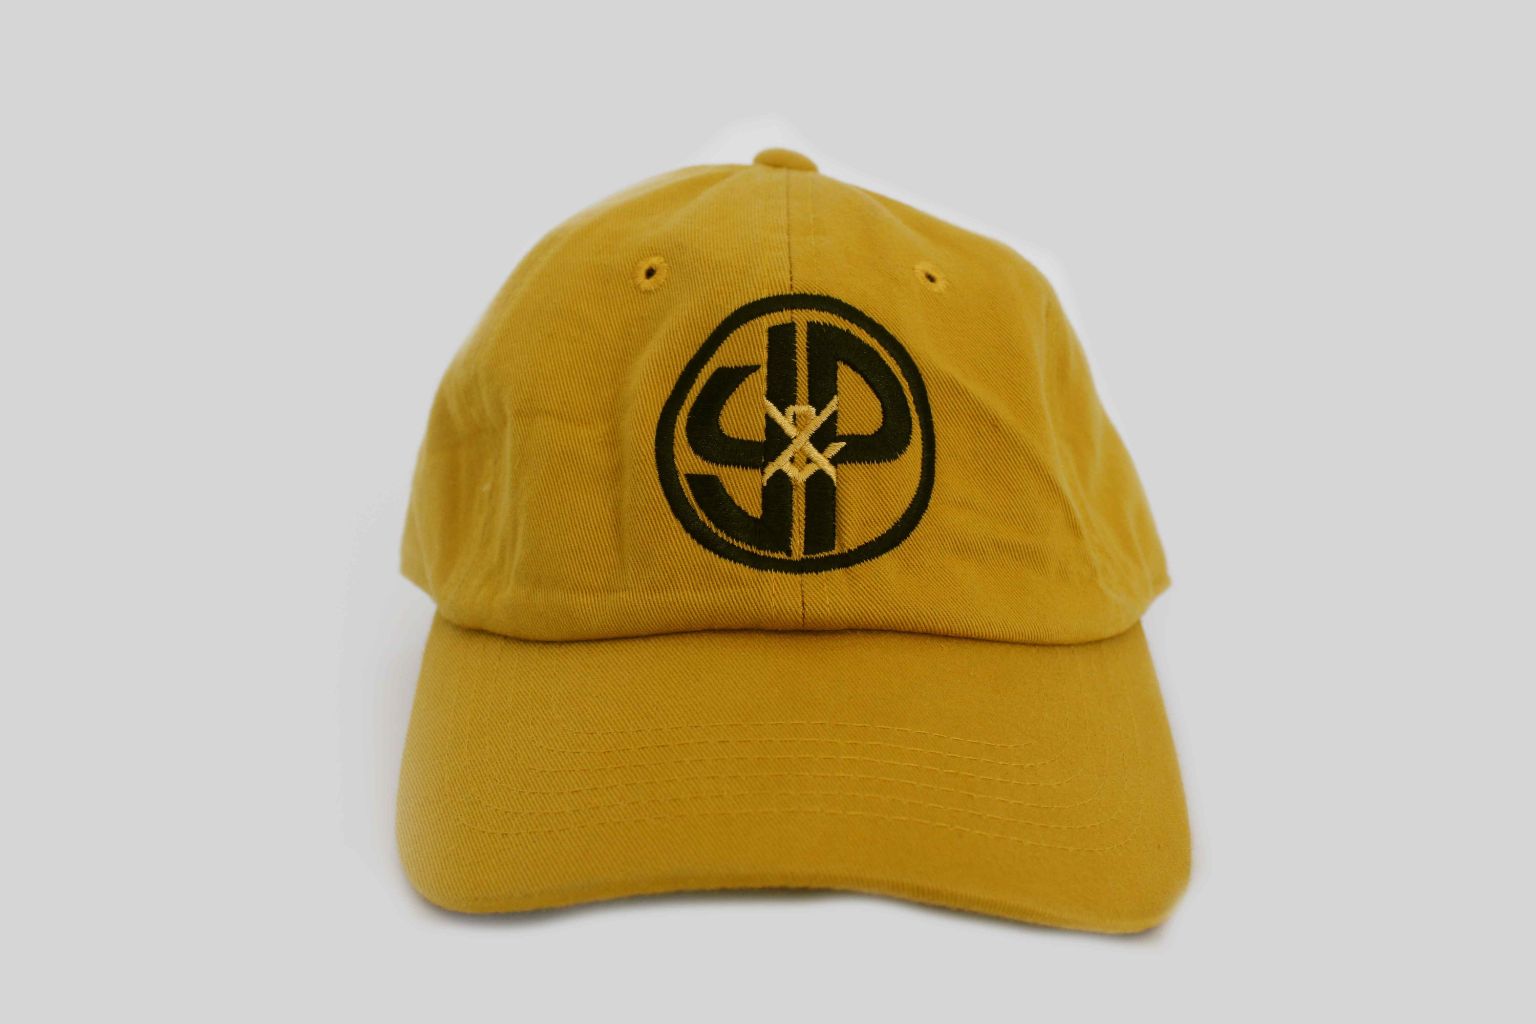 13+ Mustard Colored Hat